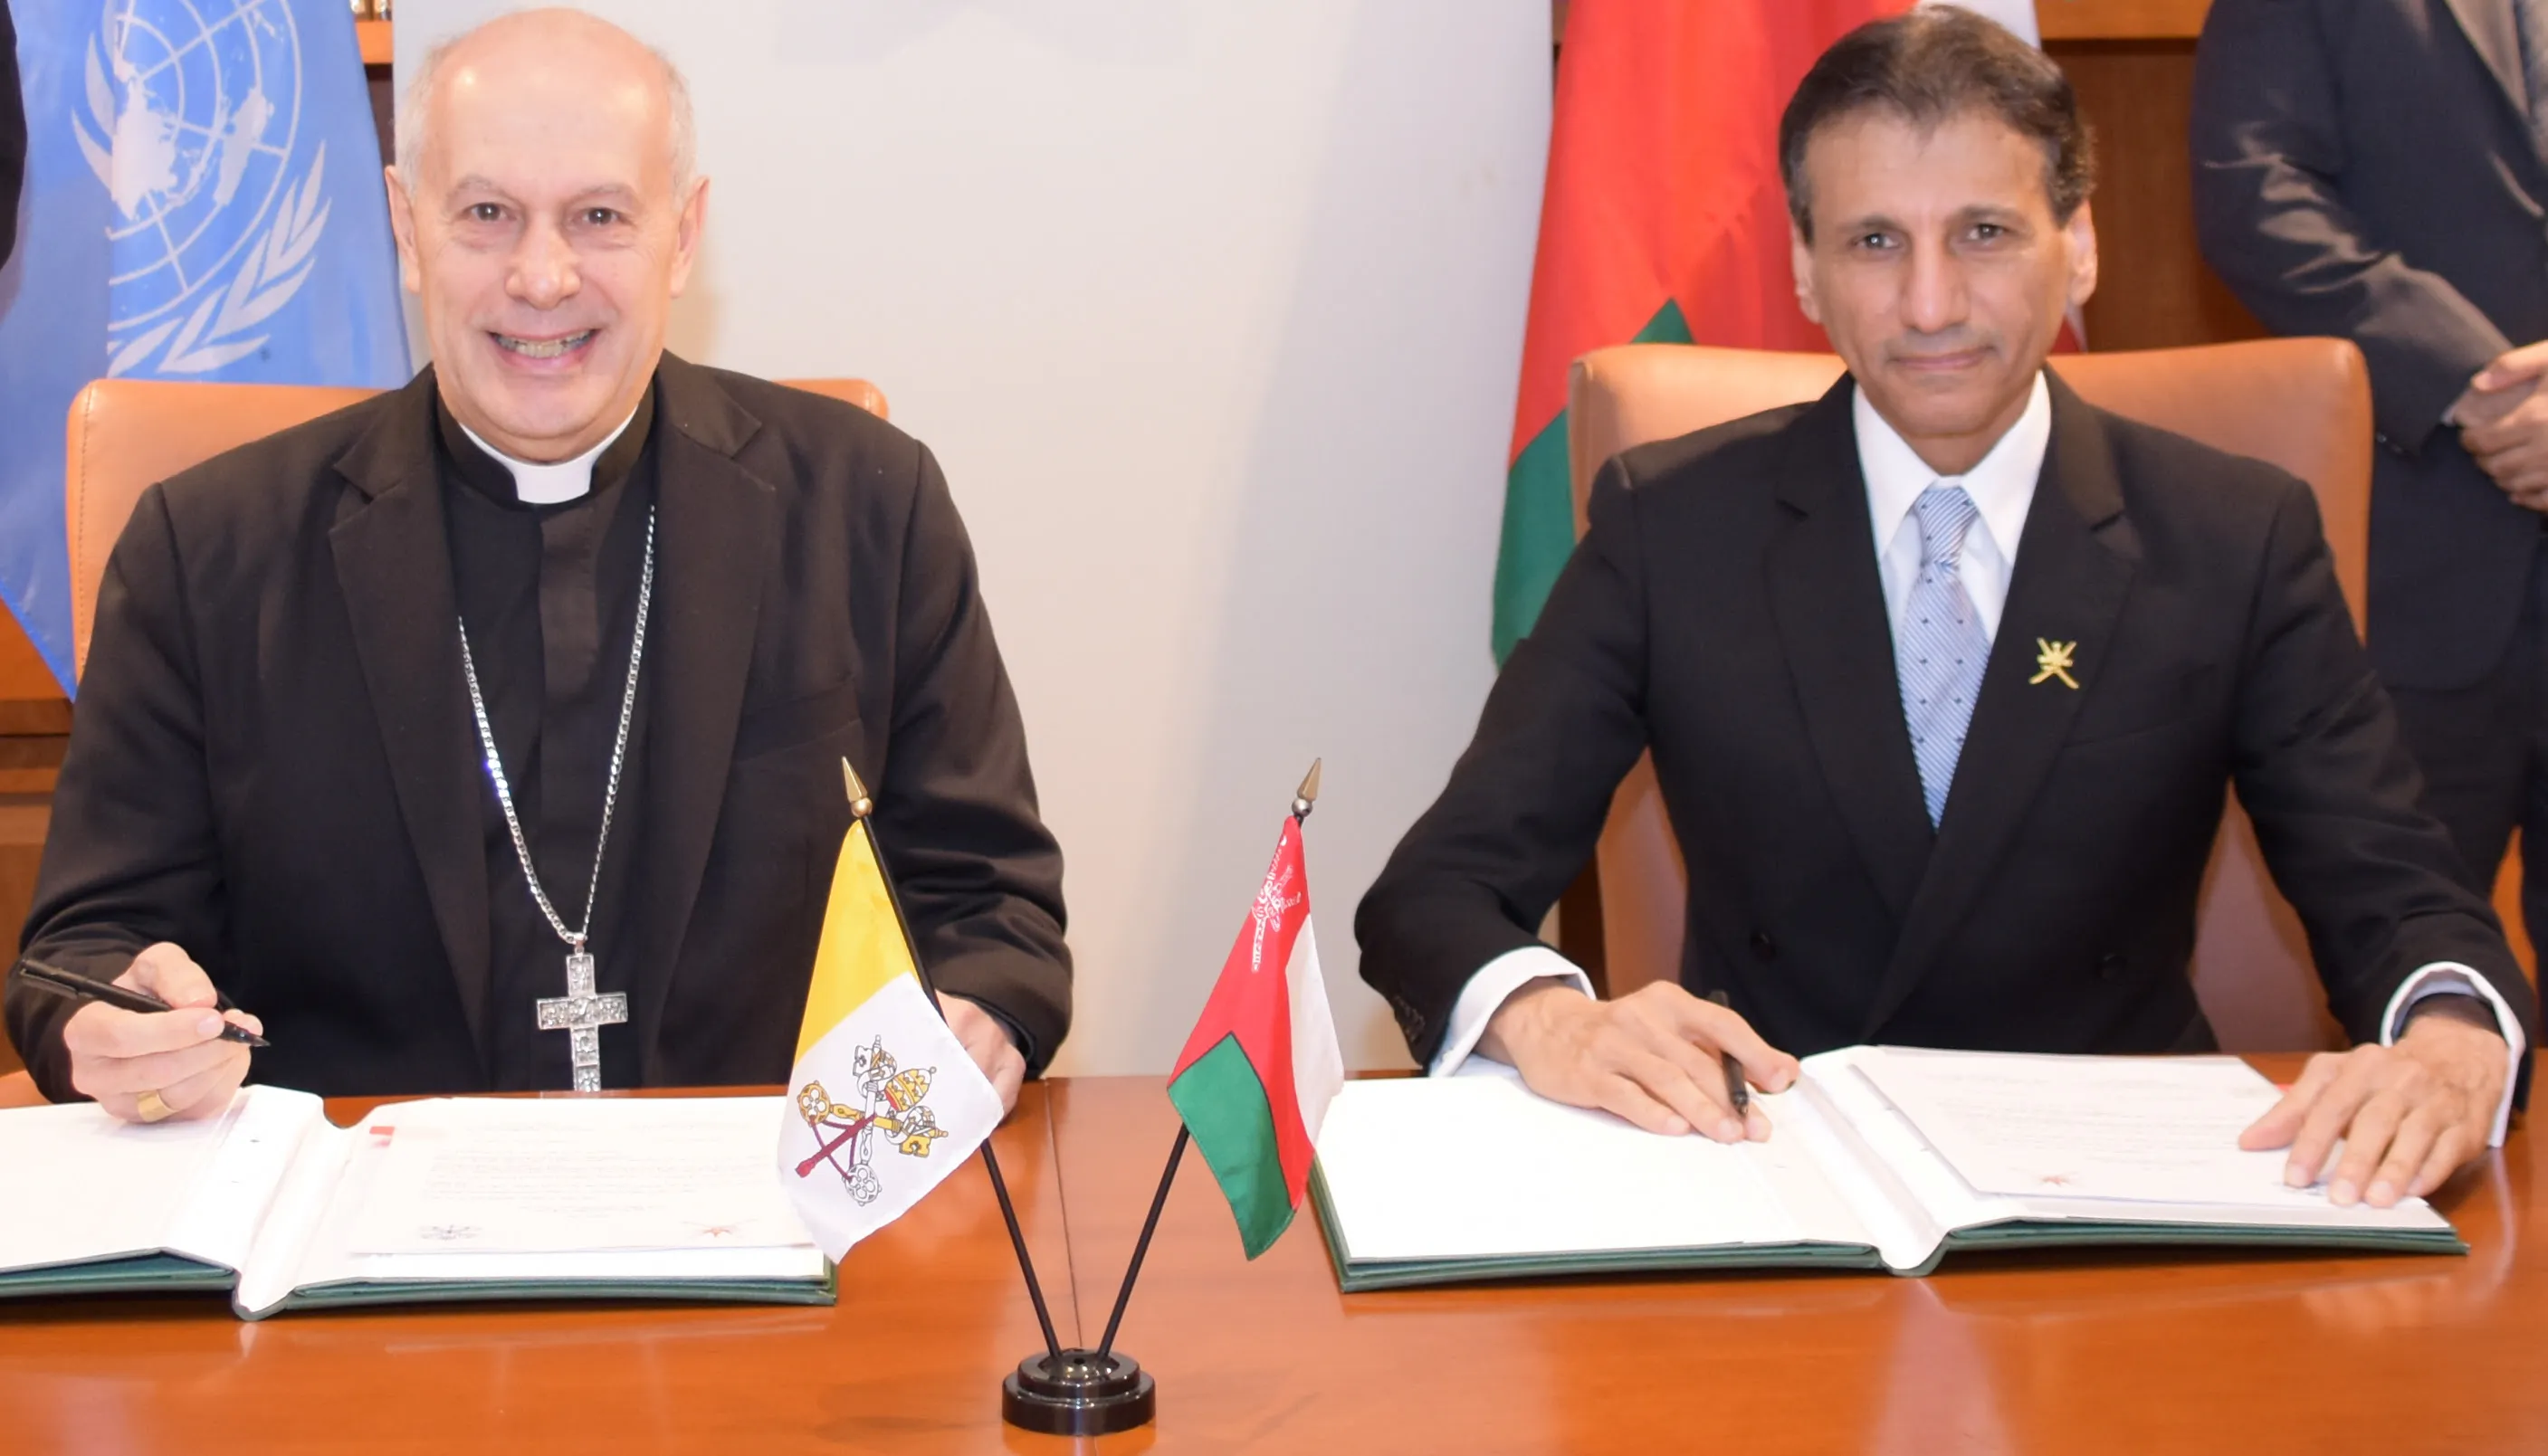 Archbishop Gabriele Caccia, Holy See Permanent Observer to the United Nations (left), and Mohammed Al-Hassan, Ambassador Extraordinary and Plenipotentiary of the Sultanate of Oman to the United Nations, at a signing ceremony establishing diplomatic relations between Oman and the Holy See. The ceremony took place  at the Permanent Mission of the Sultanate of Oman to the United Nations in New York City.?w=200&h=150